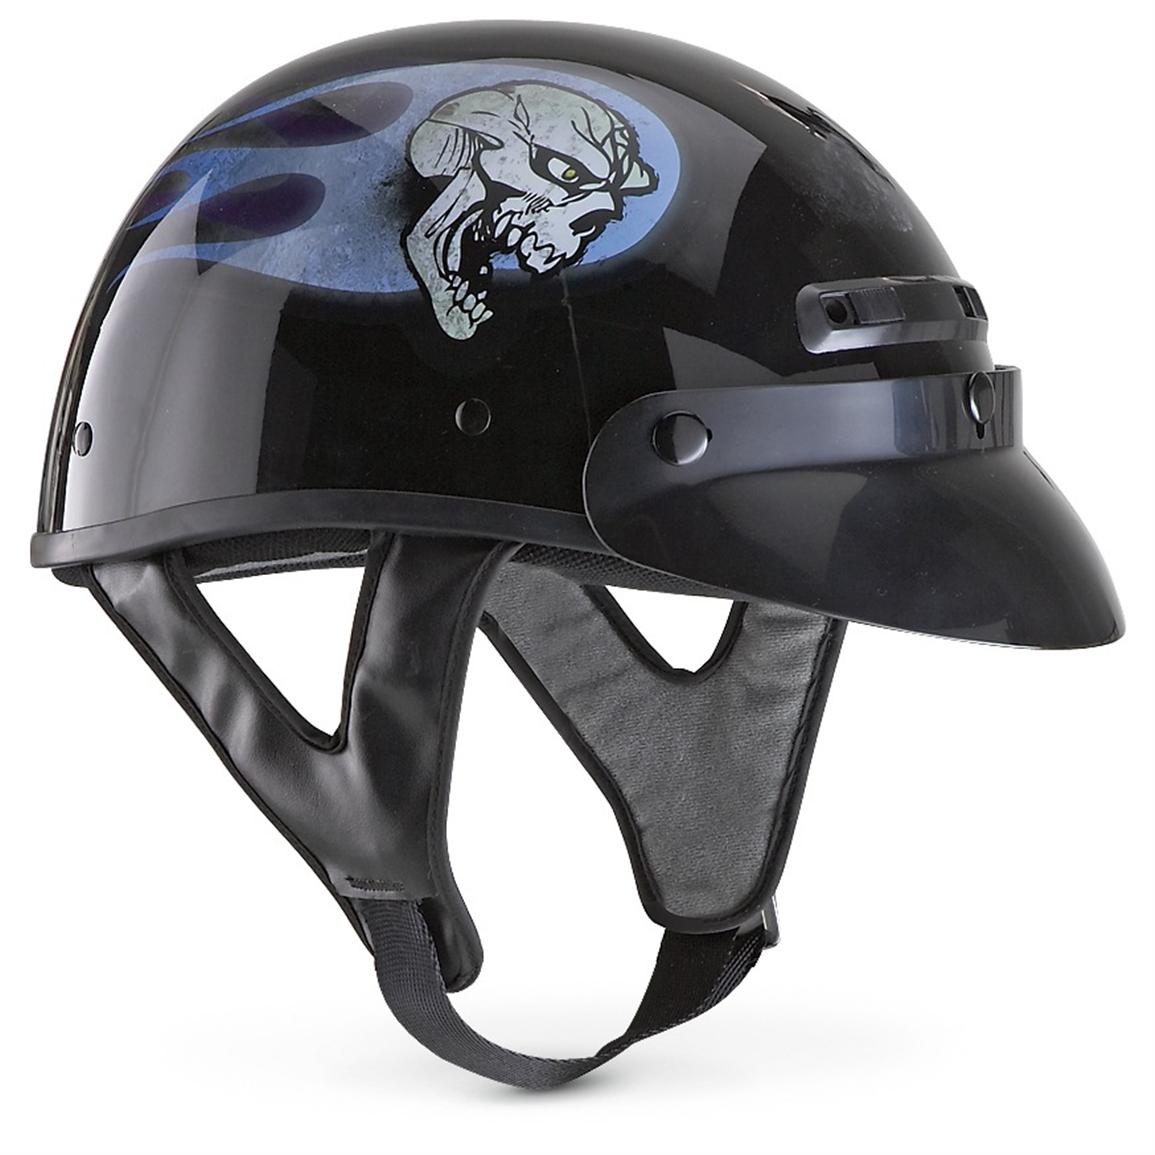 Raider™ Shorty - style Motorcycle Helmet - 202187, Helmets & Goggles at Sportsman's Guide